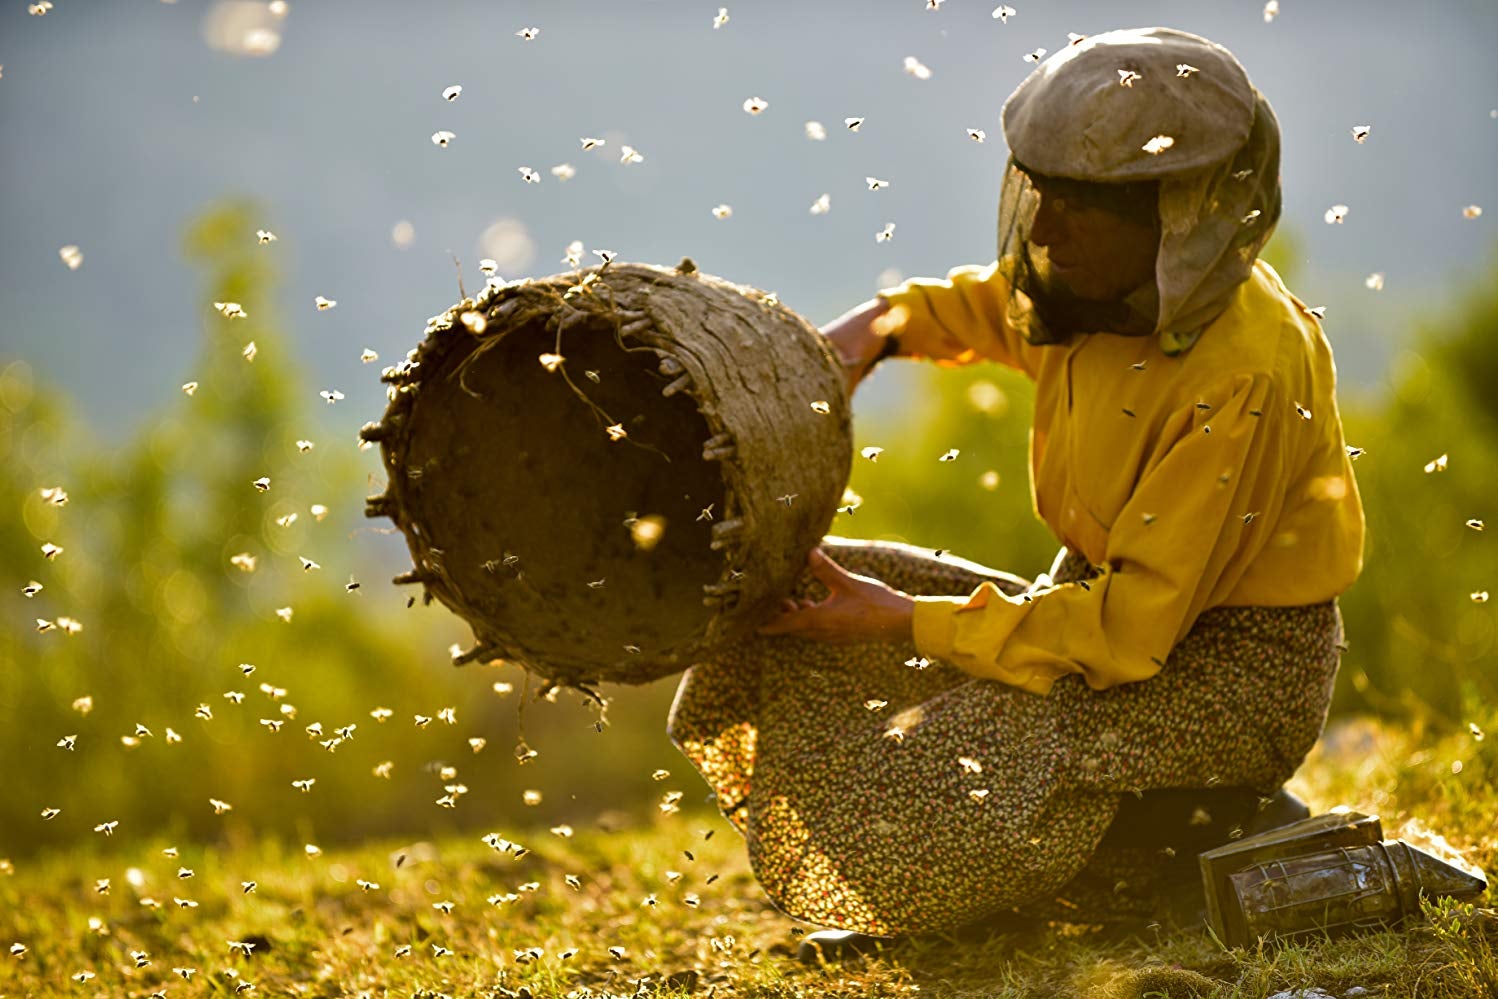 A woman dressed in yellow with a beekeeper's mask holds a halved beehive. A swarm of bees surrounding her.